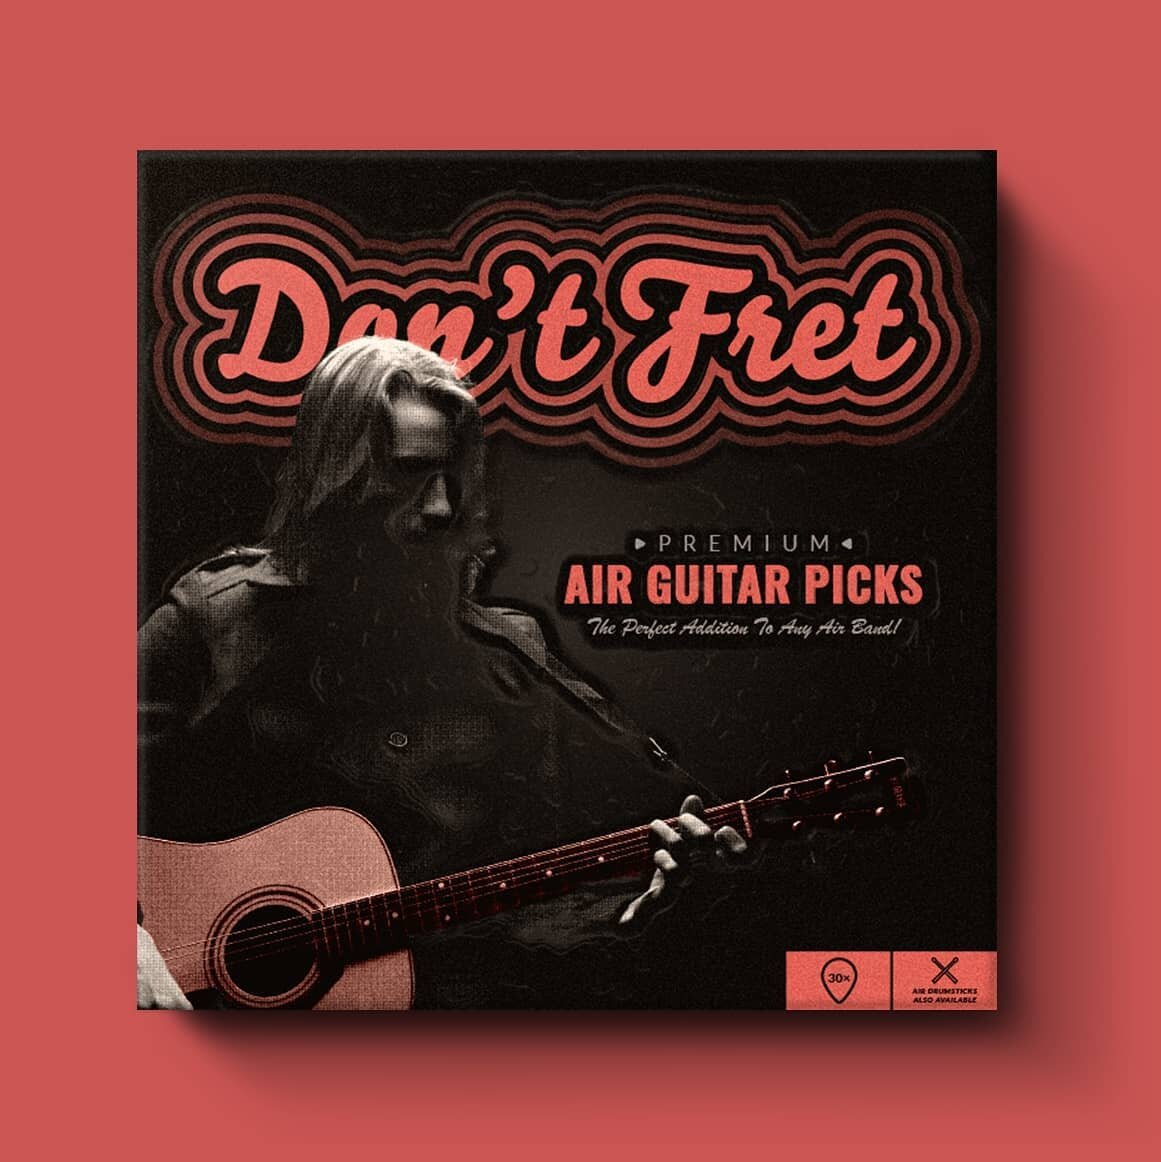 Free guitar, no strings attached.
.
.
.
.
.
#packagingdesign #packaging #design #branding #graphicdesign #packagingideas #logo #graphicdesigner #packagingbox #brandidentity #brandingdesign #brand #designer #illustration #productpackaging #logodesign 